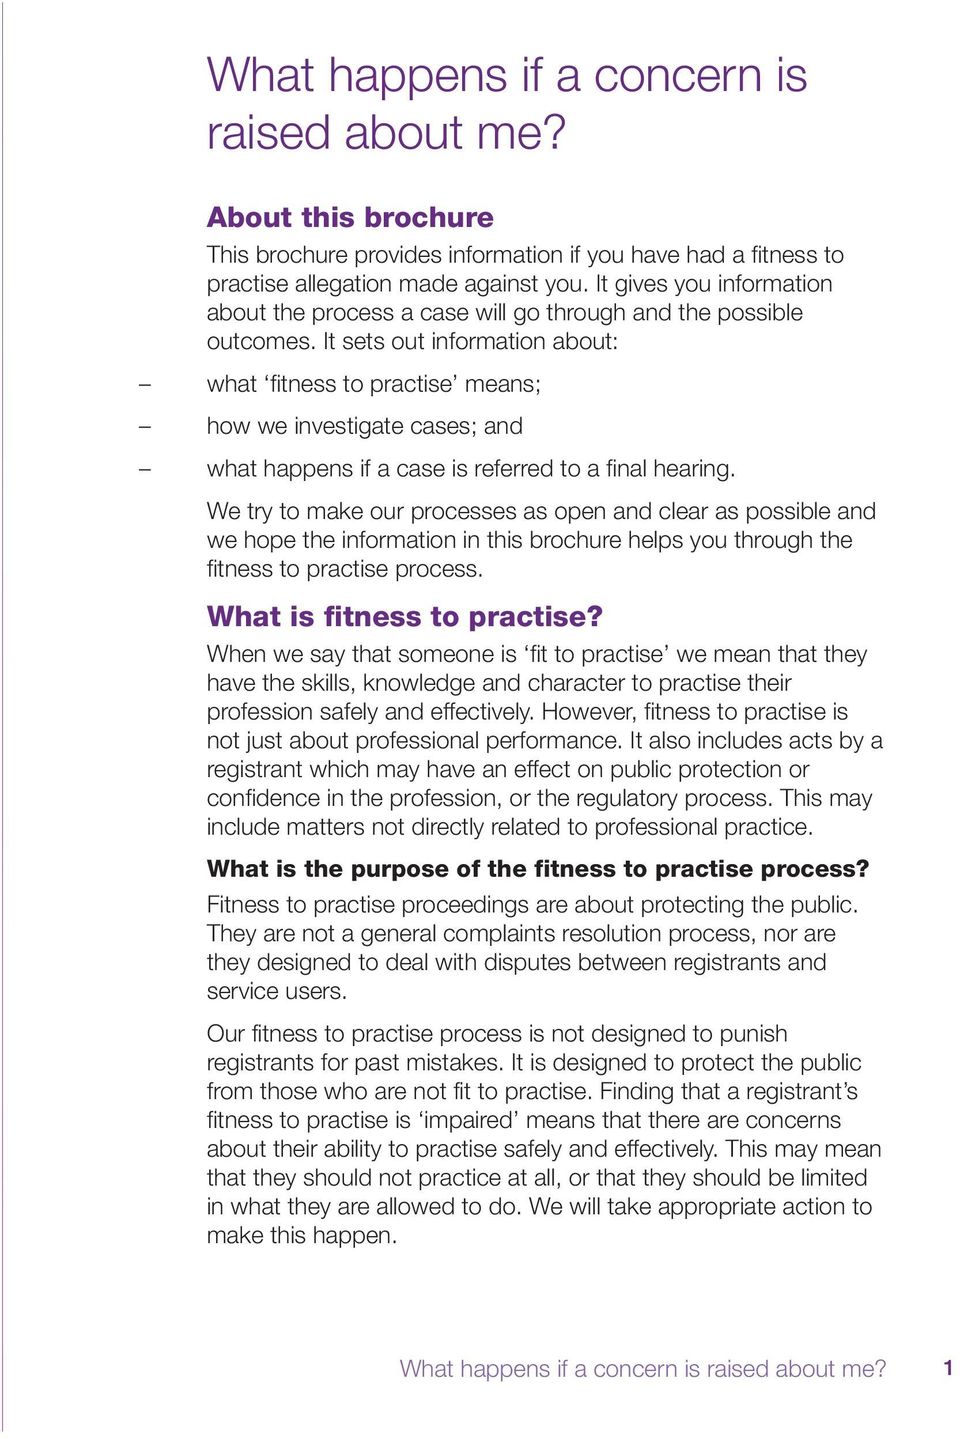 It sets out information about: what fitness to practise means; how we investigate cases; and what happens if a case is referred to a final hearing.